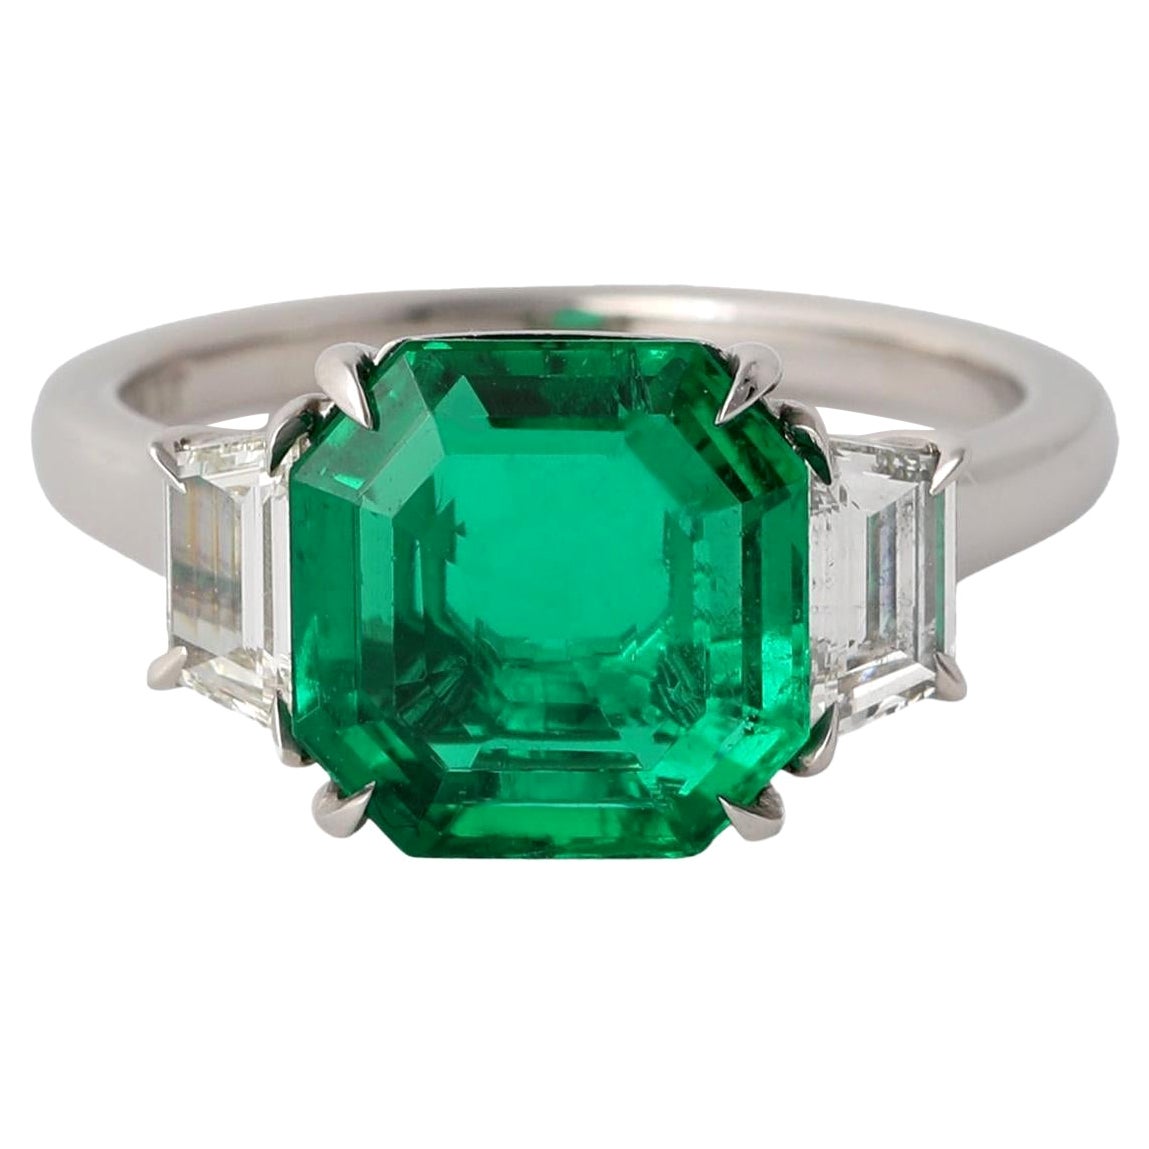 Vintage AGL SSEF 2.51 Carats Colombian Emerald Diamond Platinum Ring For Sale